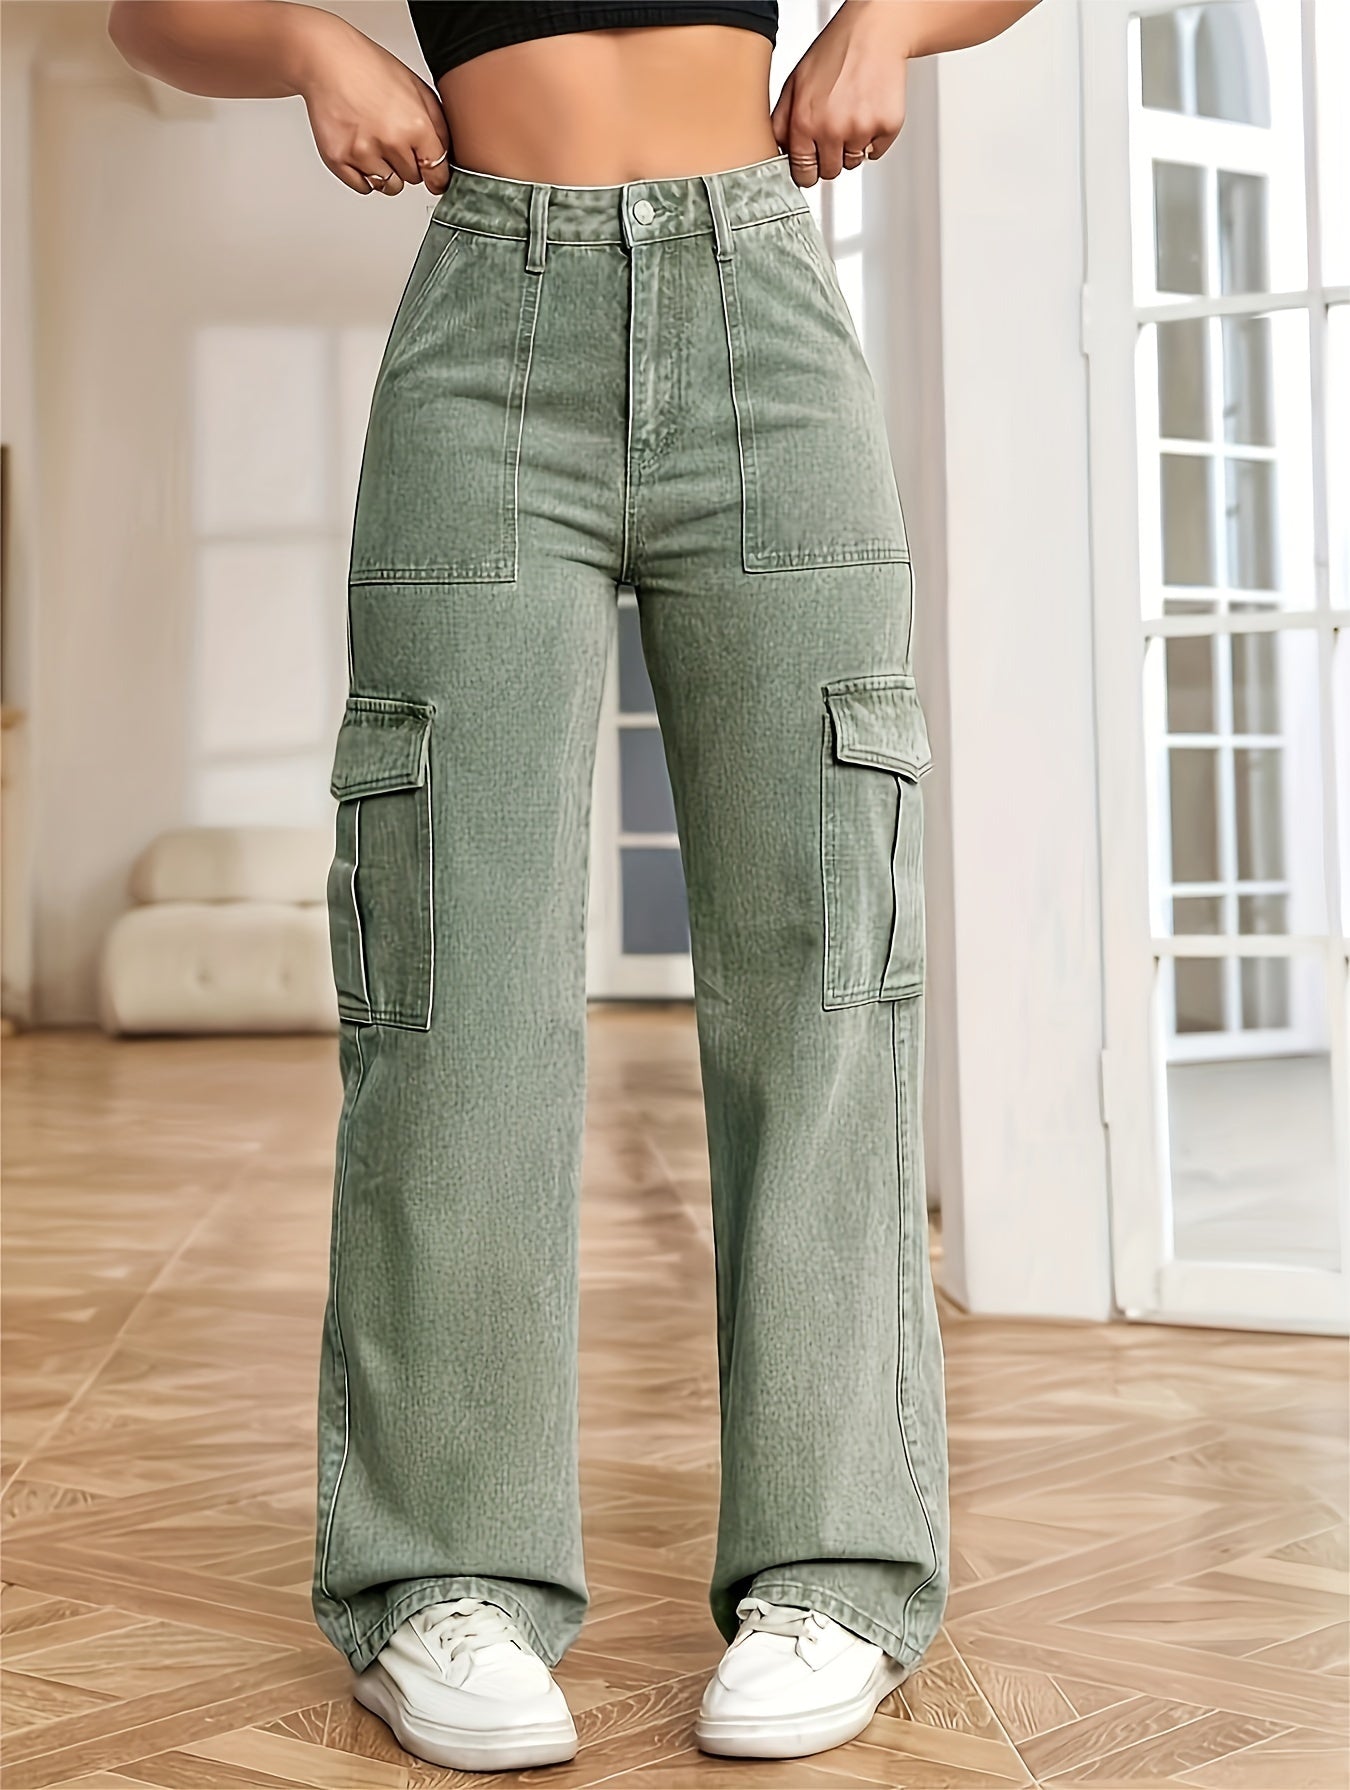 Washed Flap Pockets Cargo Pants, Loose Fit Y2K & Kpop Style Straight Jeans, Women's Denim Jeans & Clothing - LESSANA